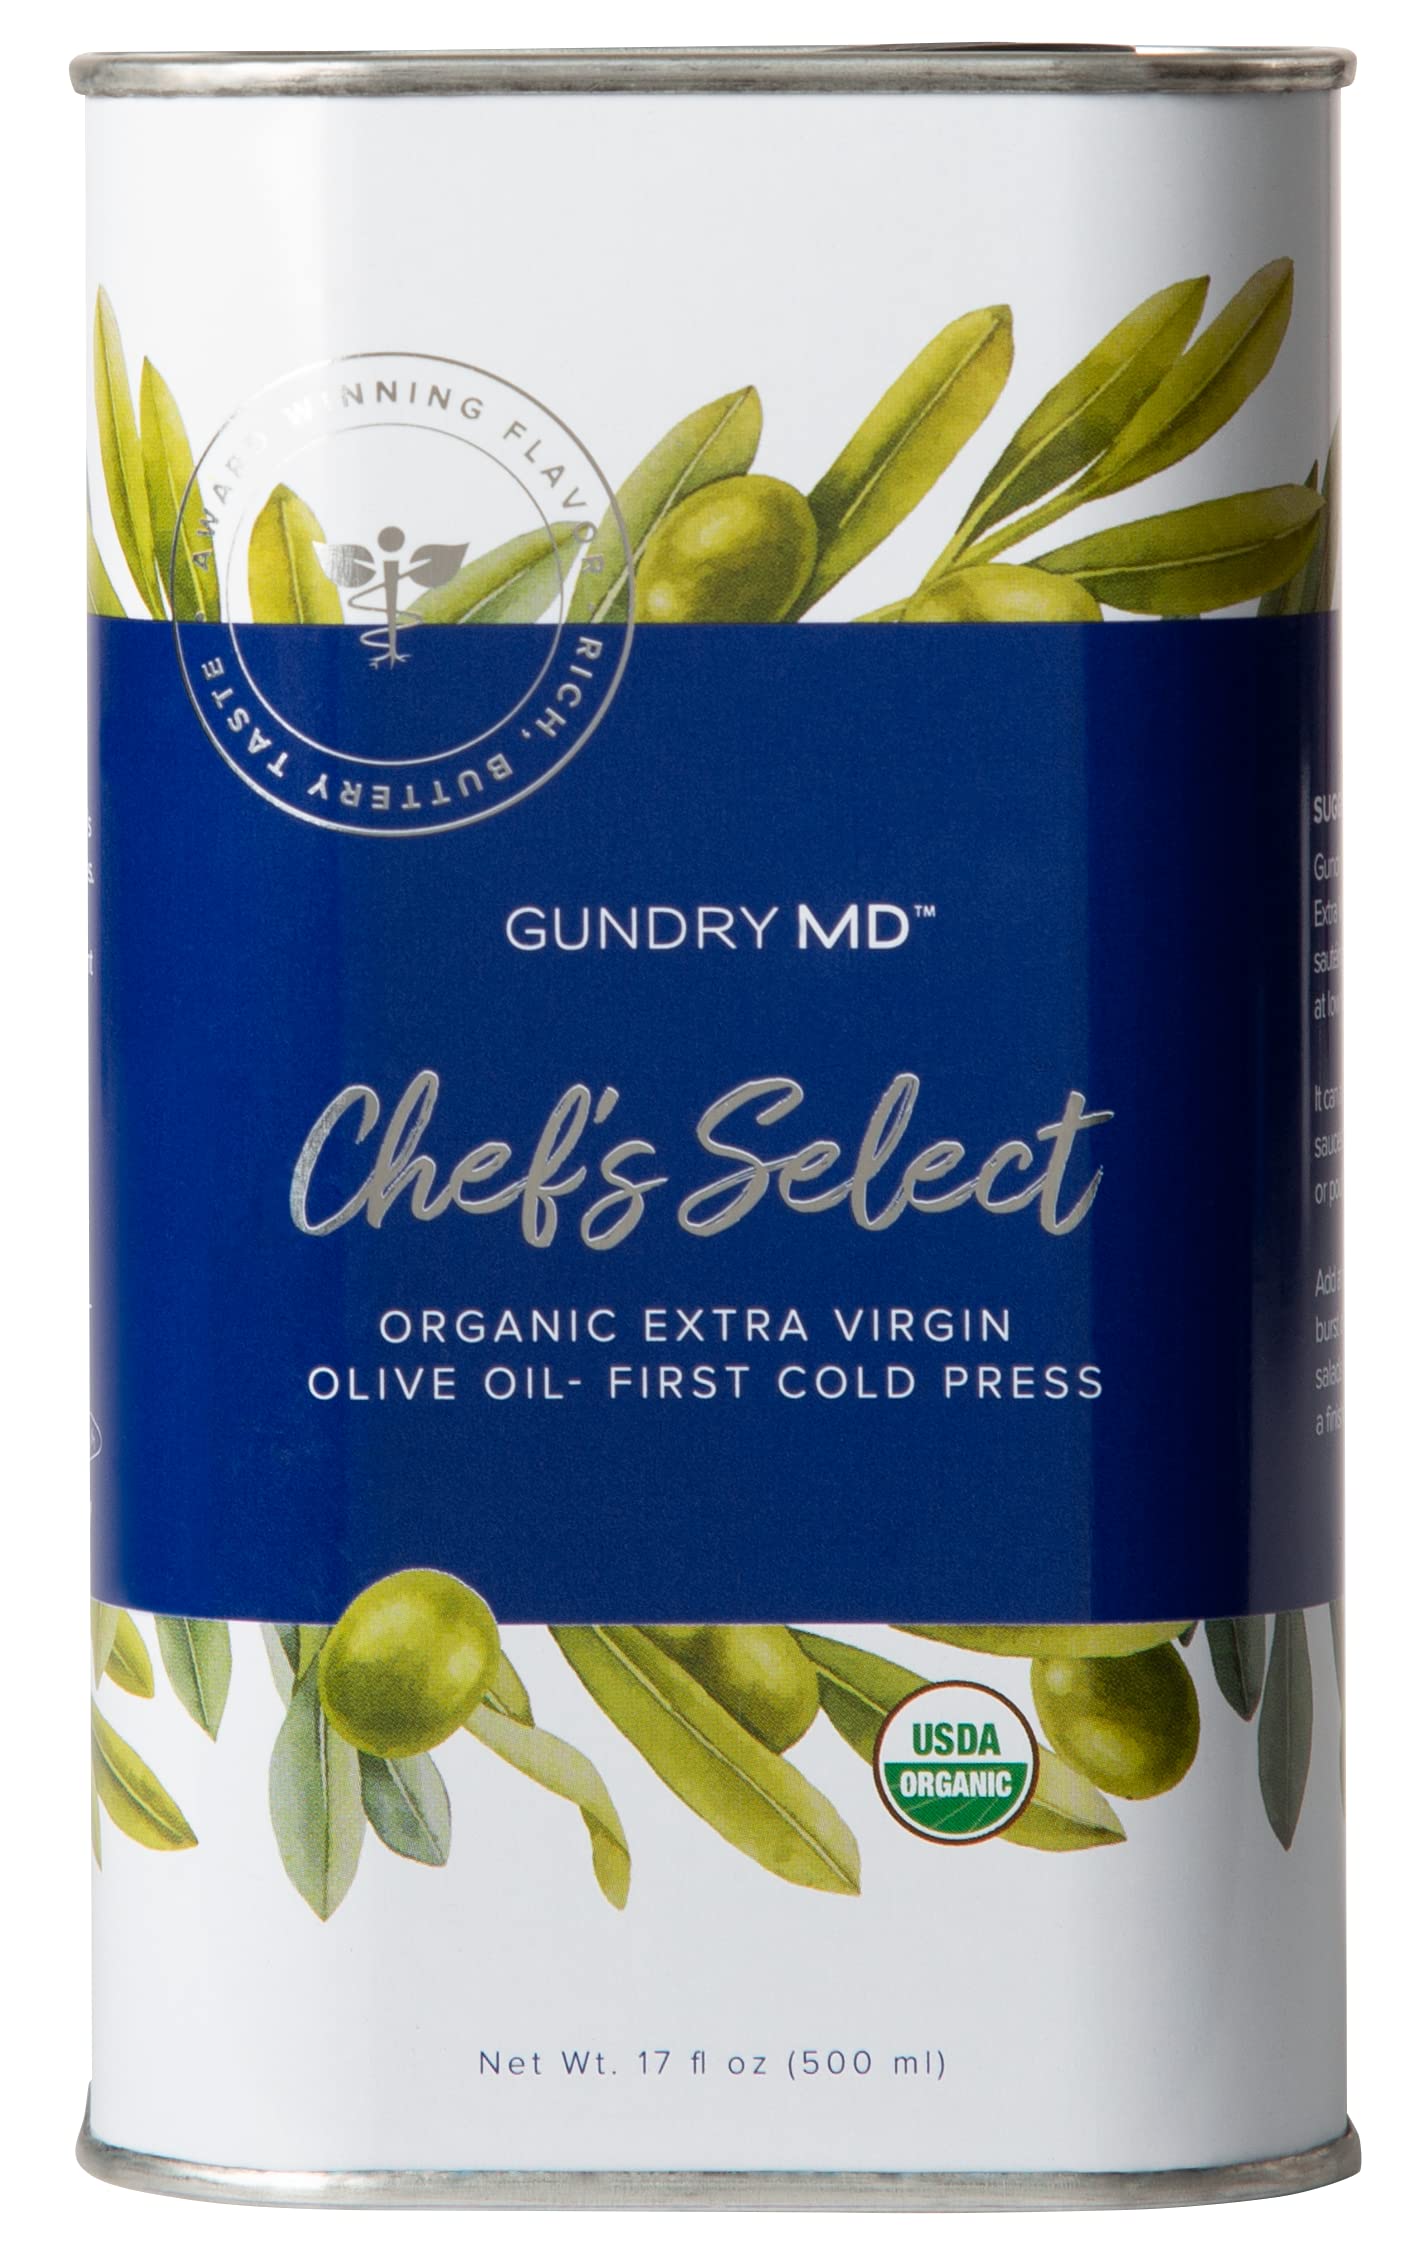 Gundry MD Chef's Select Organic Extra Virgin Olive Oil, First Cold Press